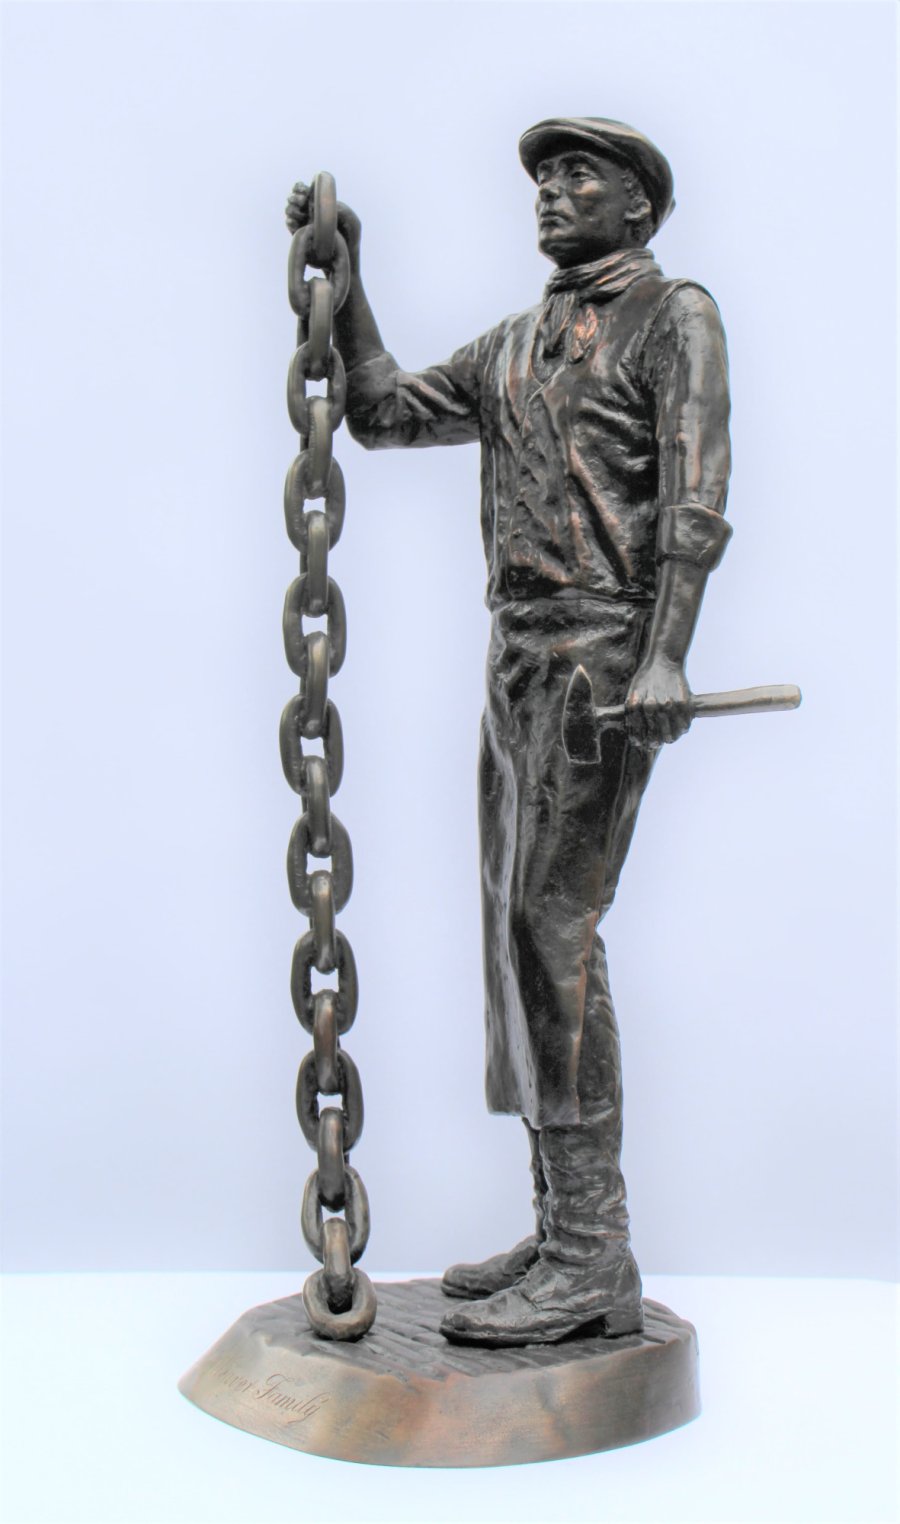 Chain Maker bronze sculpture from the side